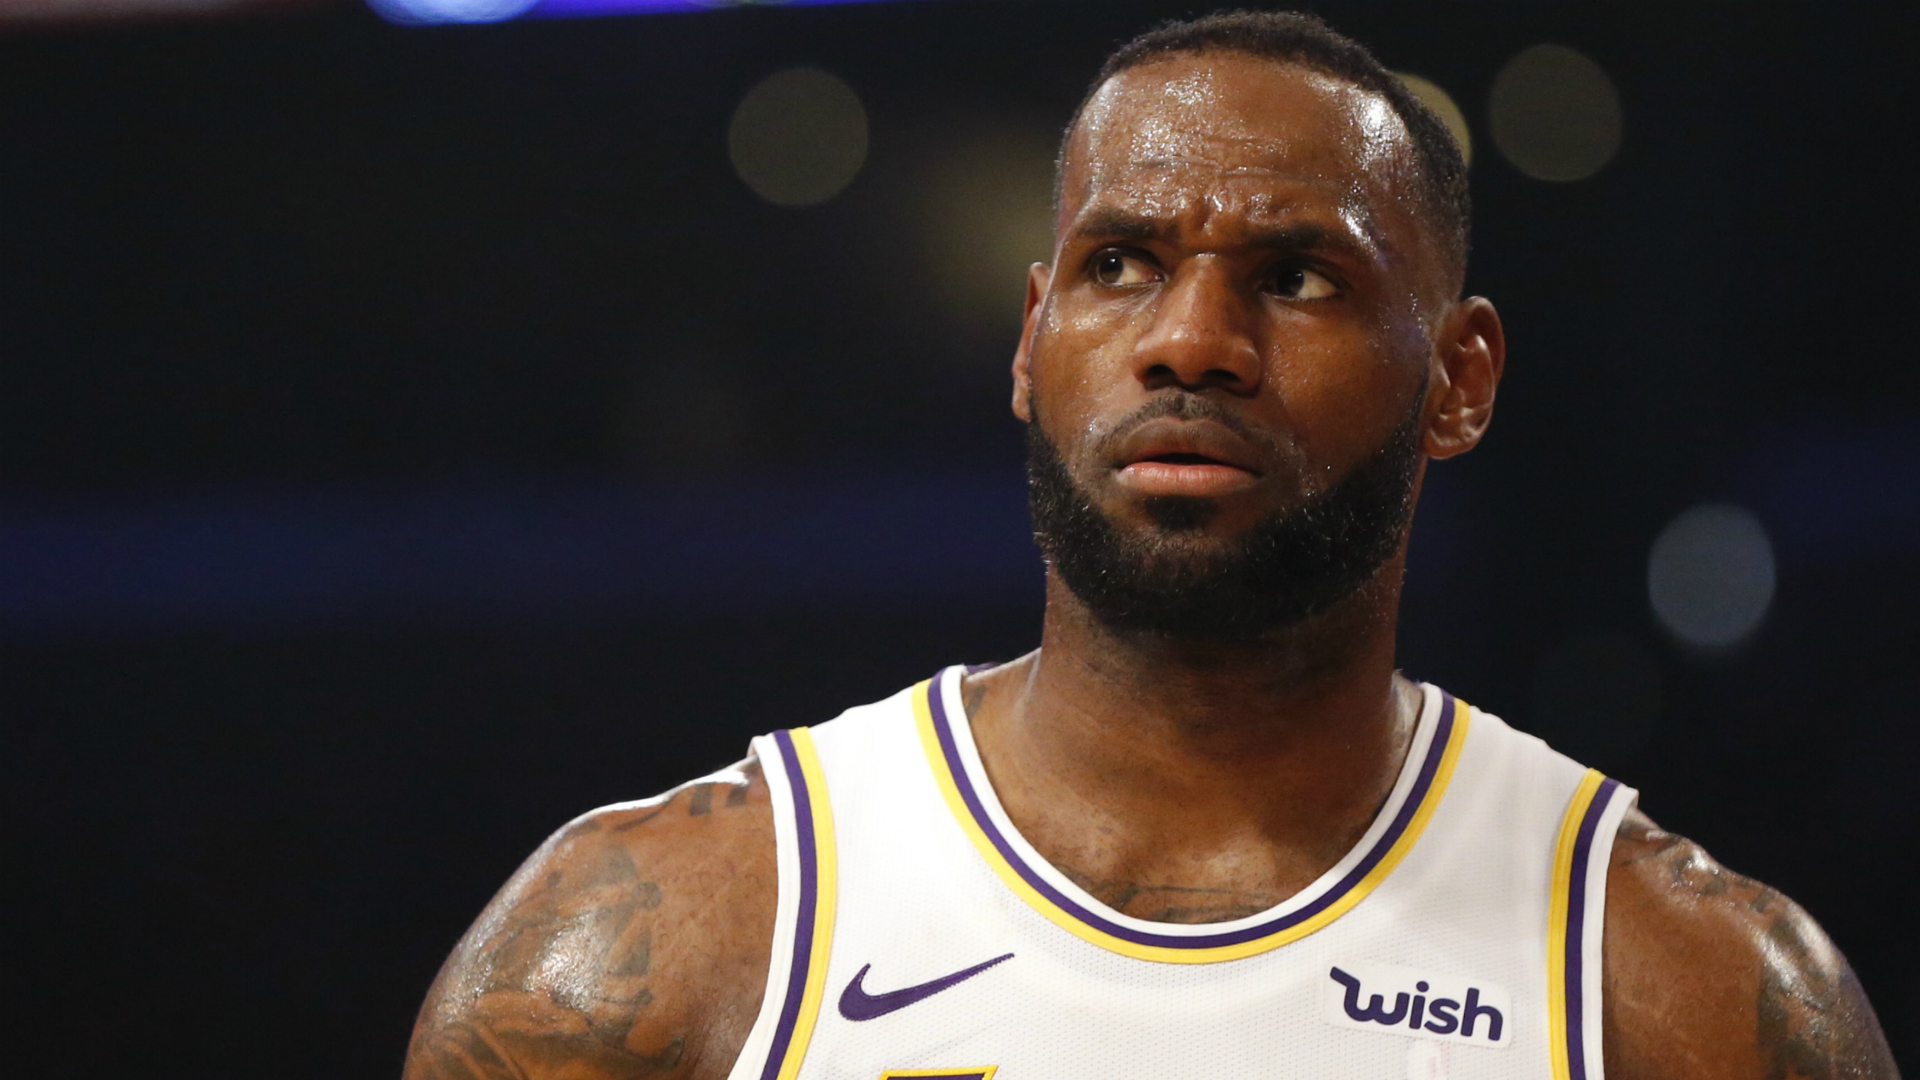 Los Angeles Lakers superstar LeBron James reflected on Sunday's 114-100 defeat to the Dallas Mavericks.